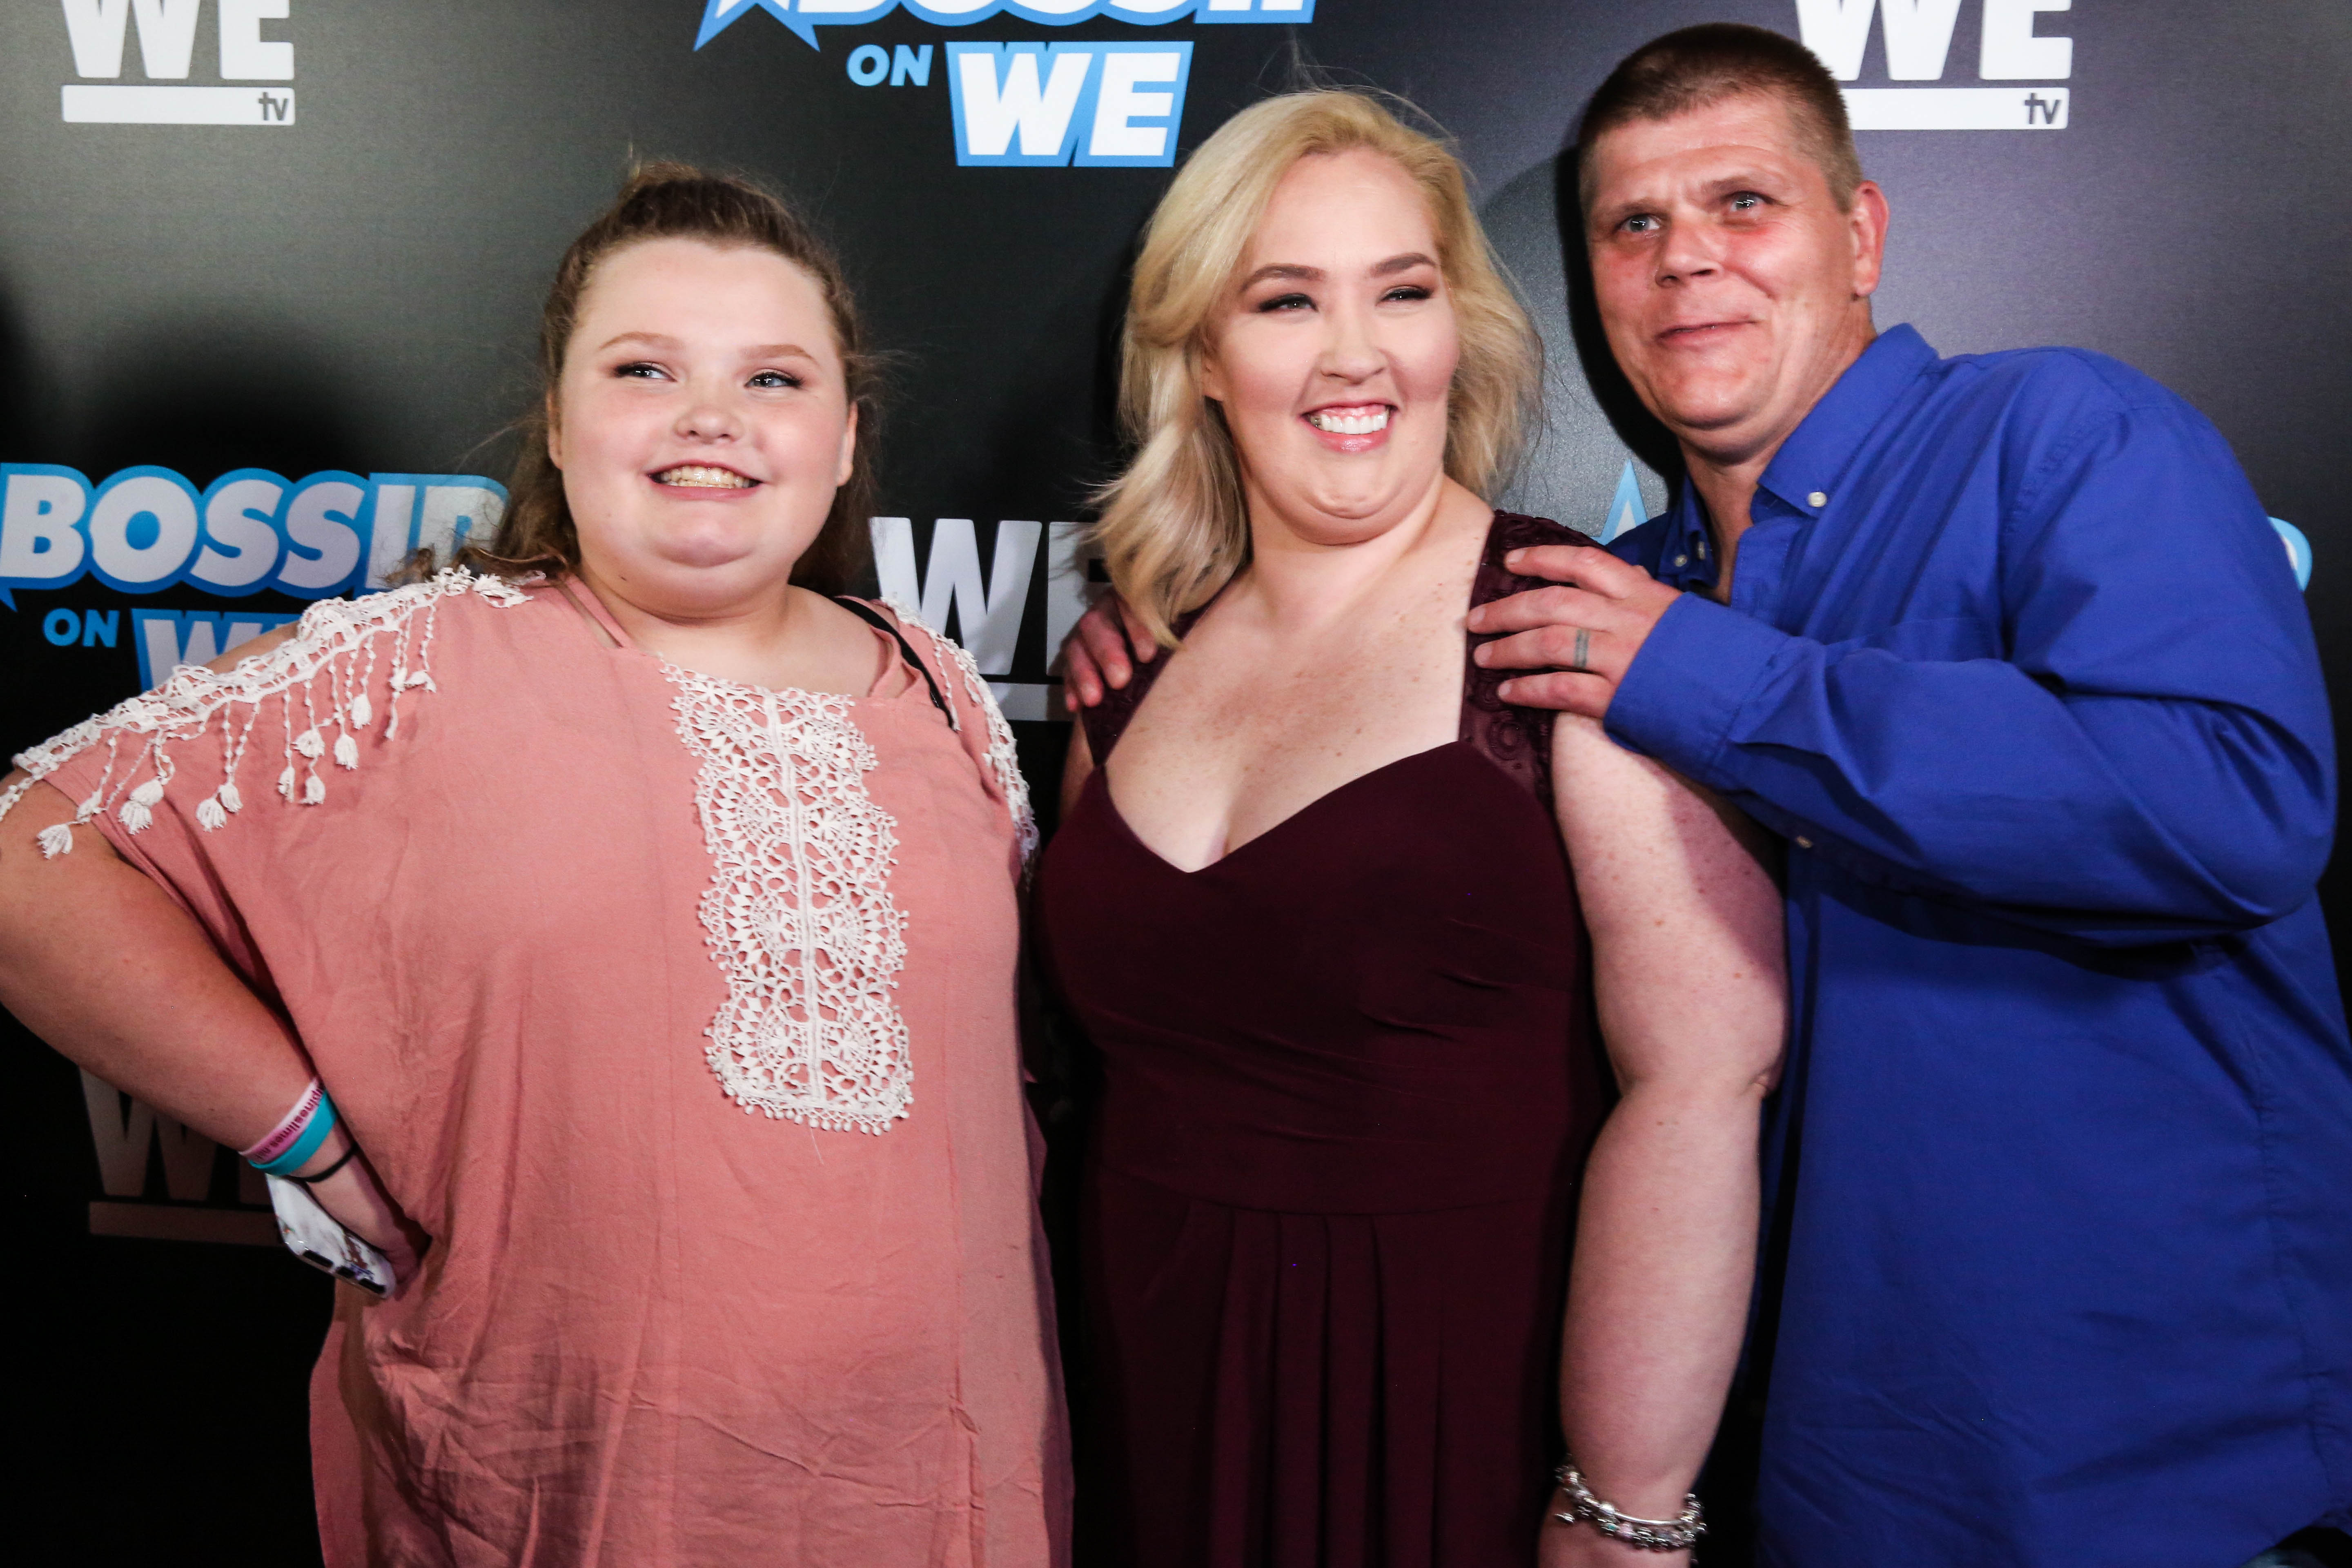 Alana Thompson, Mama June Shannon, and Geno Doak at the 2nd Annual Bossip 'Best Dressed List' event at Avenue on July 31, 2018 in Los Angeles, California | Photo: Getty Images